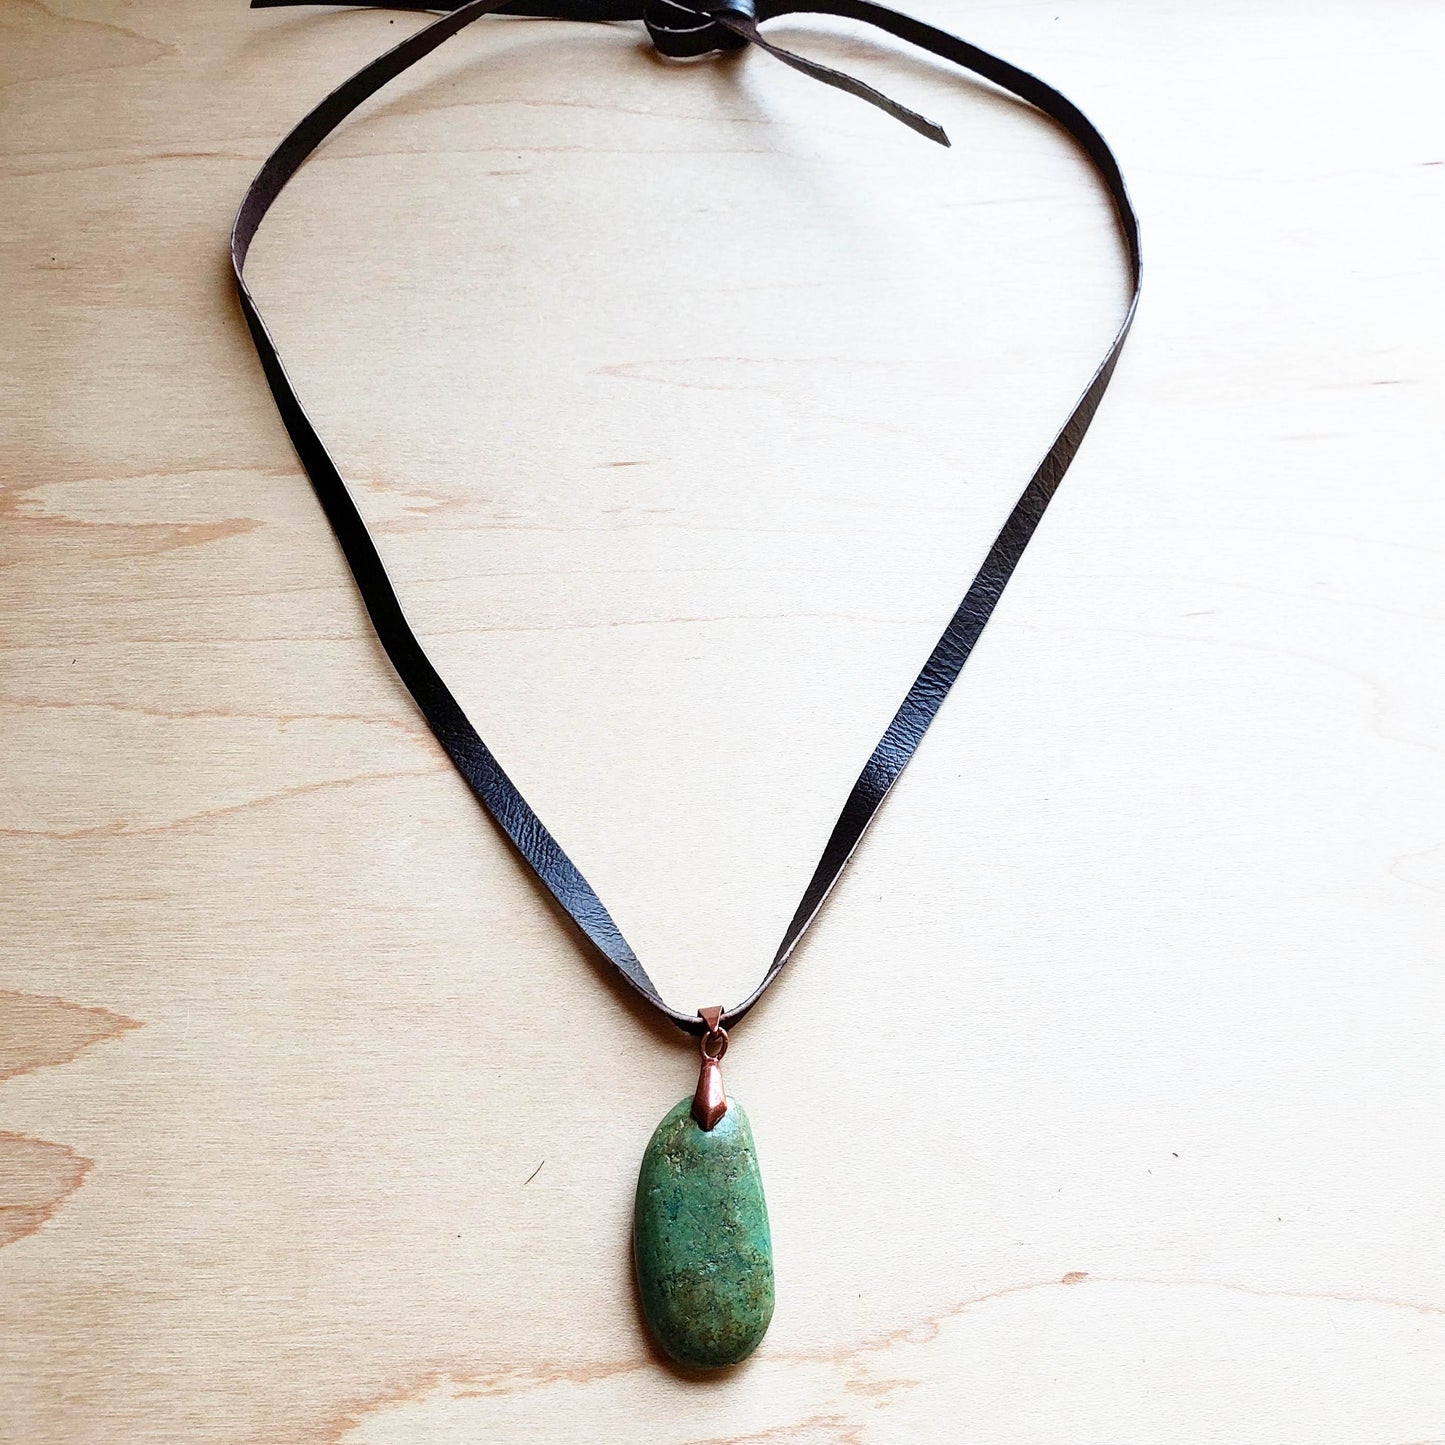 Leather Necklace with Natural Turquoise Pendant-Brown 249r